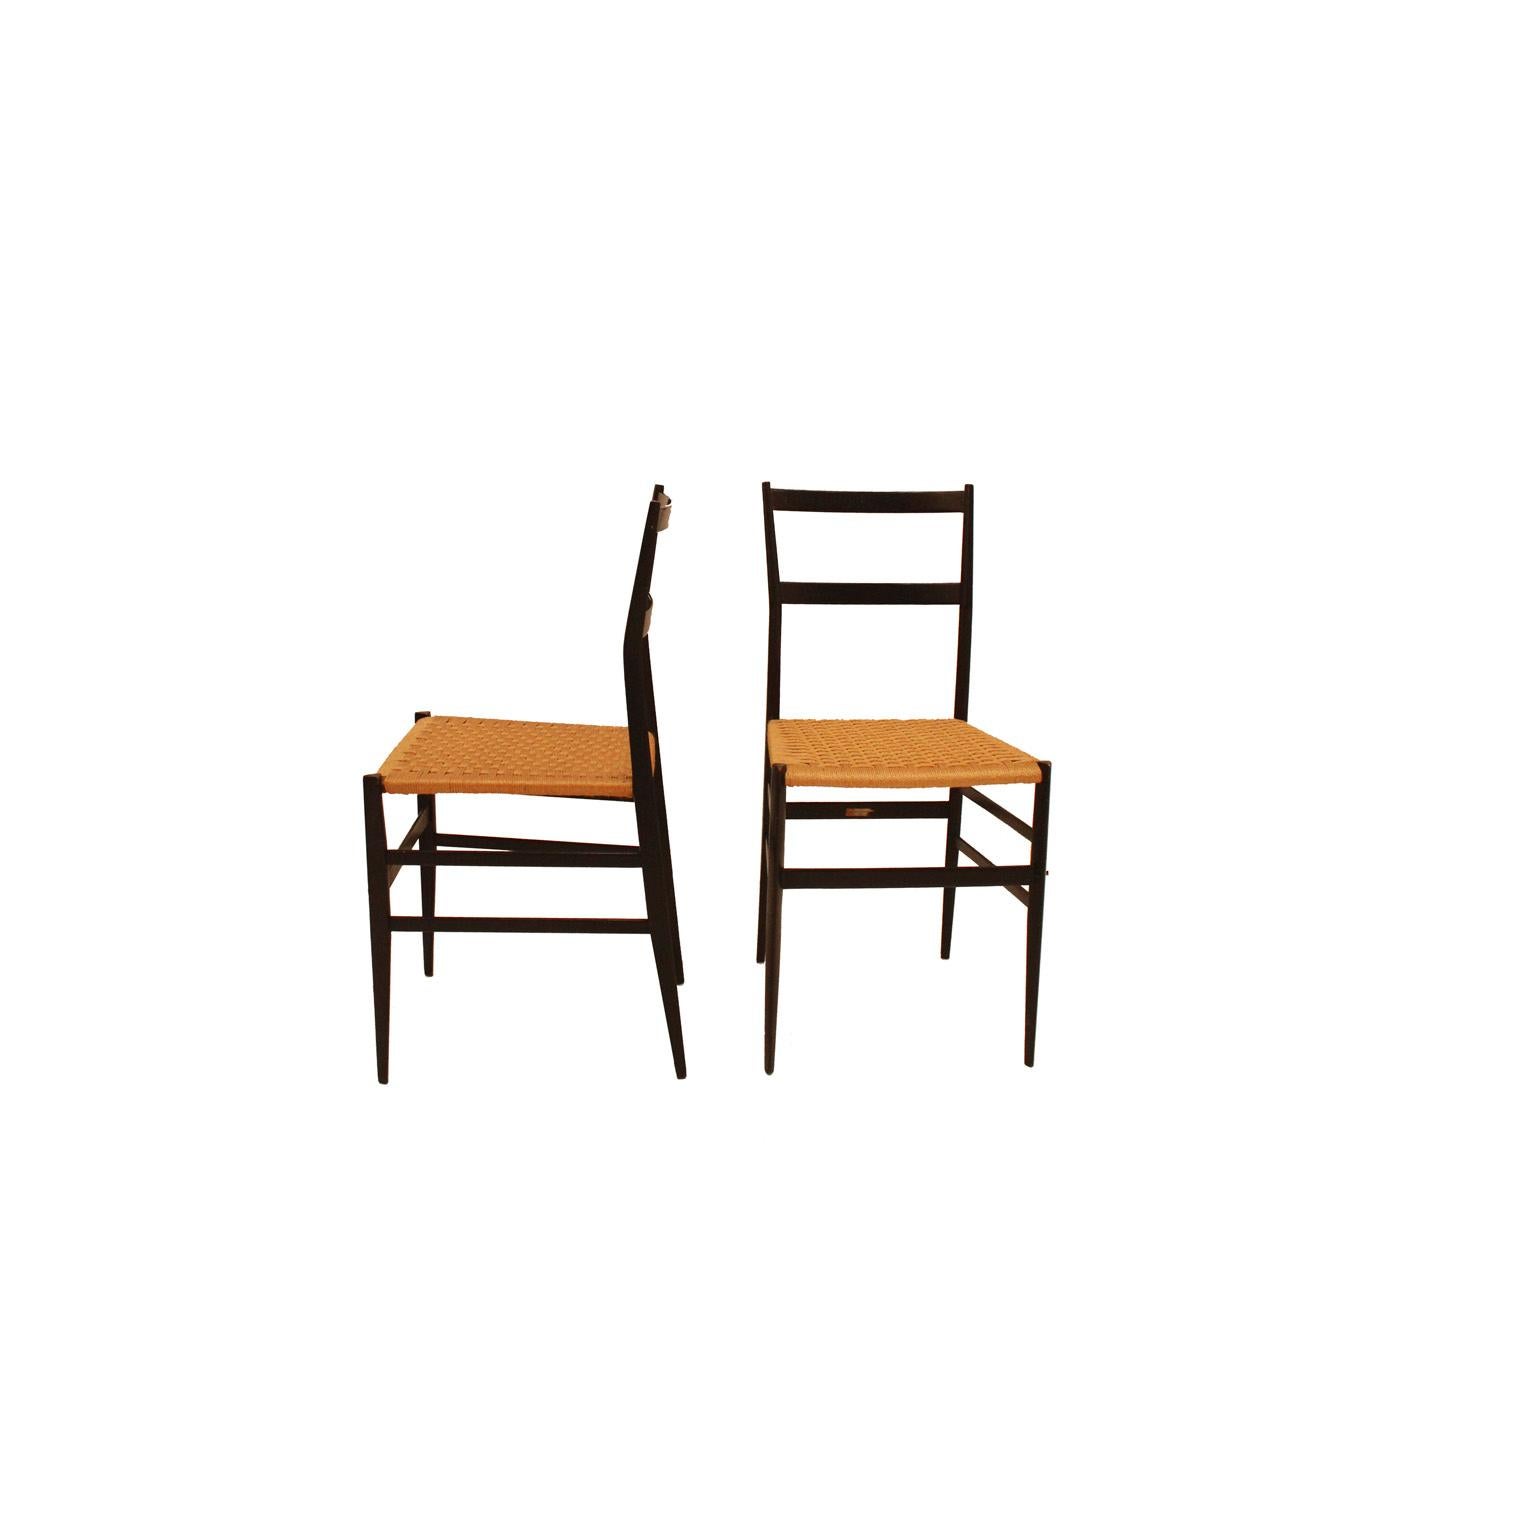 Set of eight chairs mod. Superleggera designed by Gio Ponti for Figli Di Amadeo Cassina. Made of solid ash wood and rattan. Italy 1957. Its construction challenge is contained in the triangular section of the legs, only 18 millimeters and with a